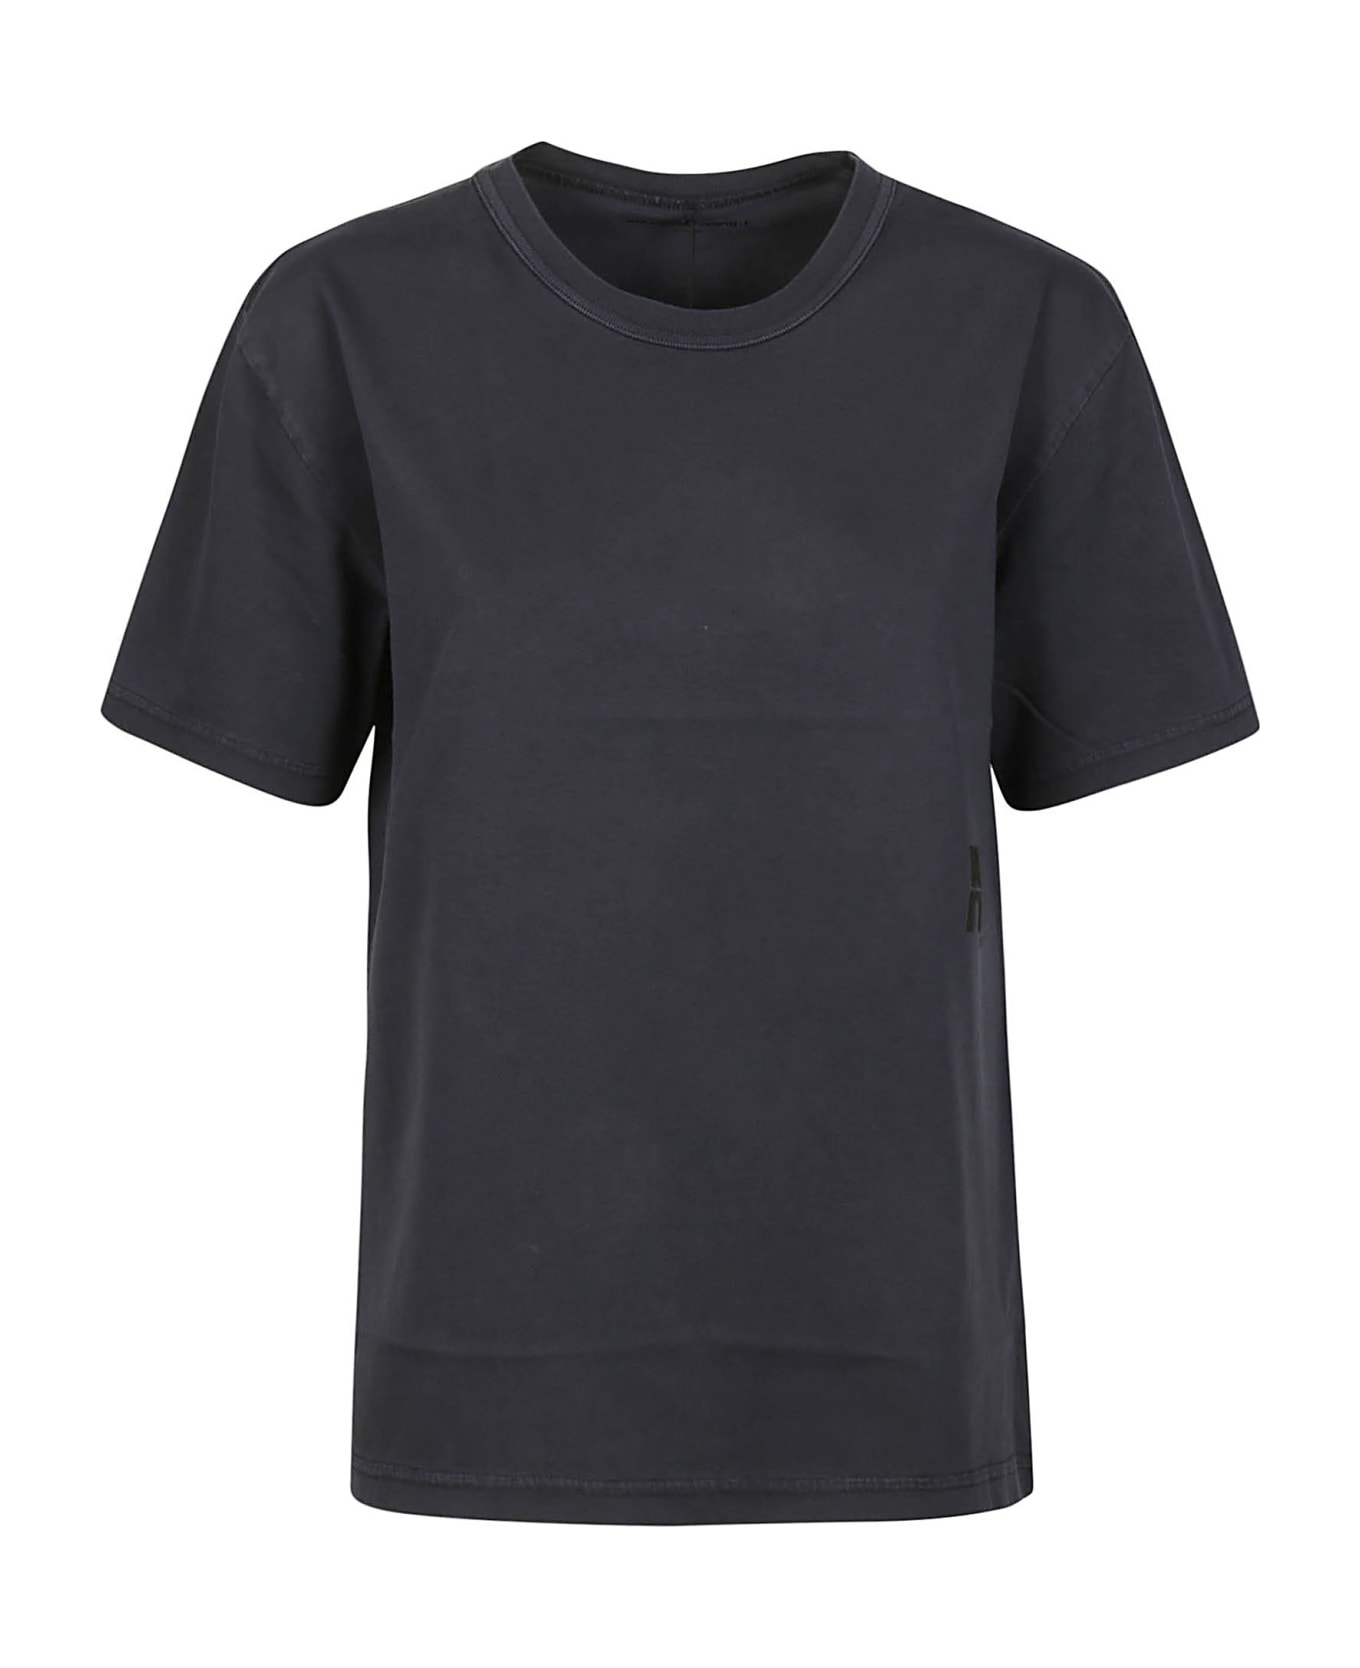 T by Alexander Wang Puff Logo Bound Neck Essential T-shirt - A Soft Obsidian Tシャツ